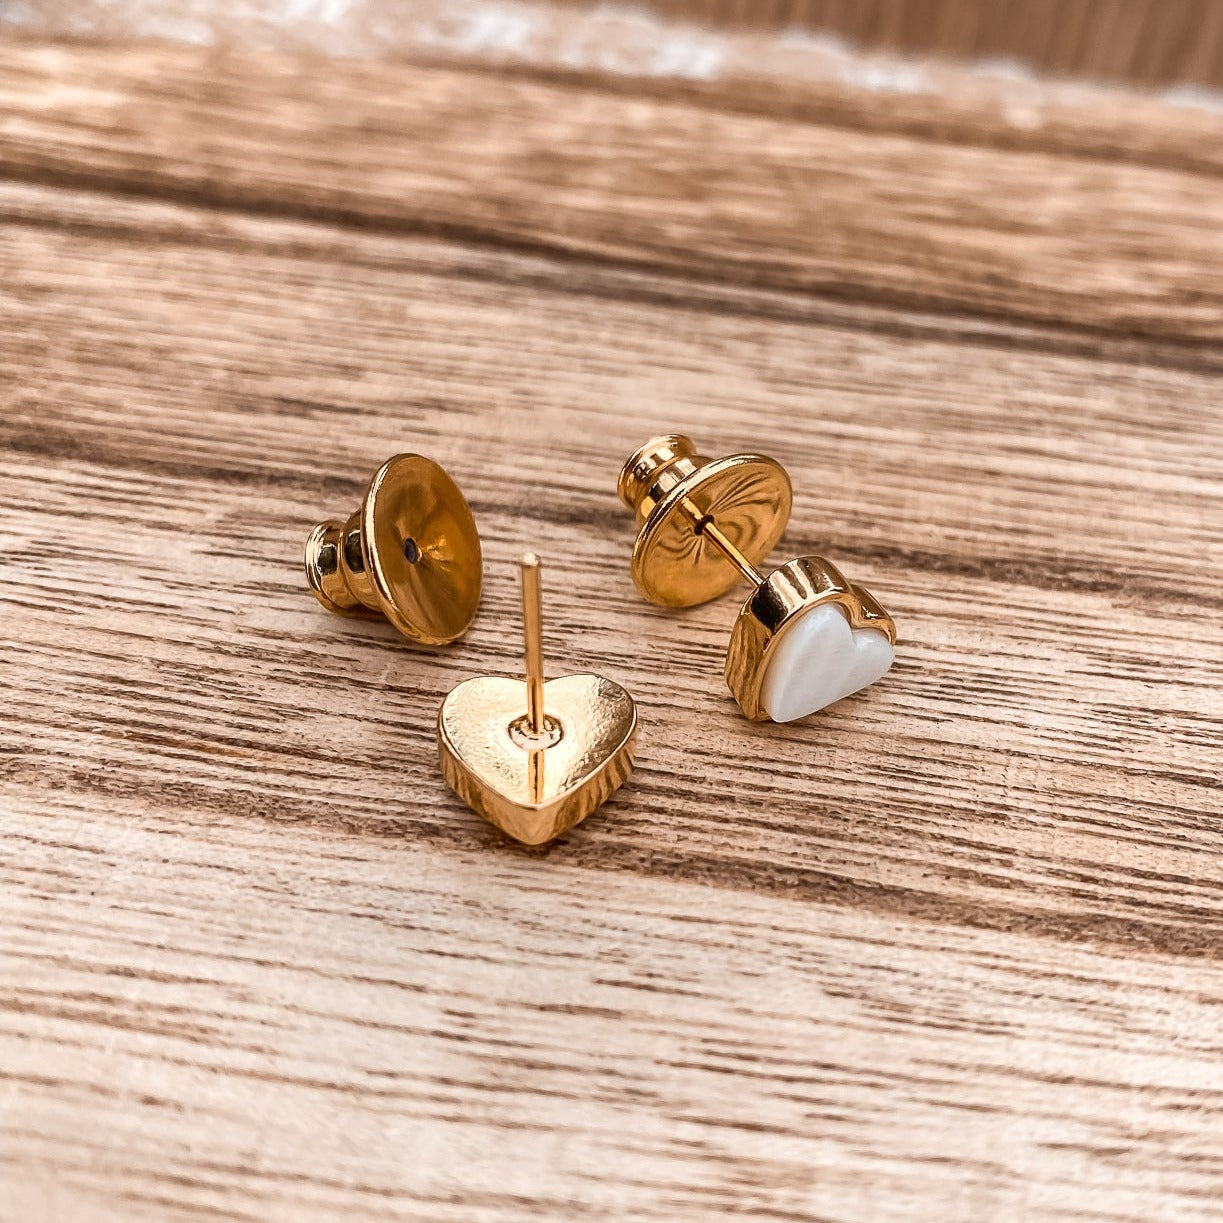 Yellow Gold plated earrings with a heart shaped mother-of-pearl pendant. Wedding and bridal jewelry. Great gift fro brides, bridesmaid and maid of honor made by Born to Rock . Jewelry store based in San Diego California